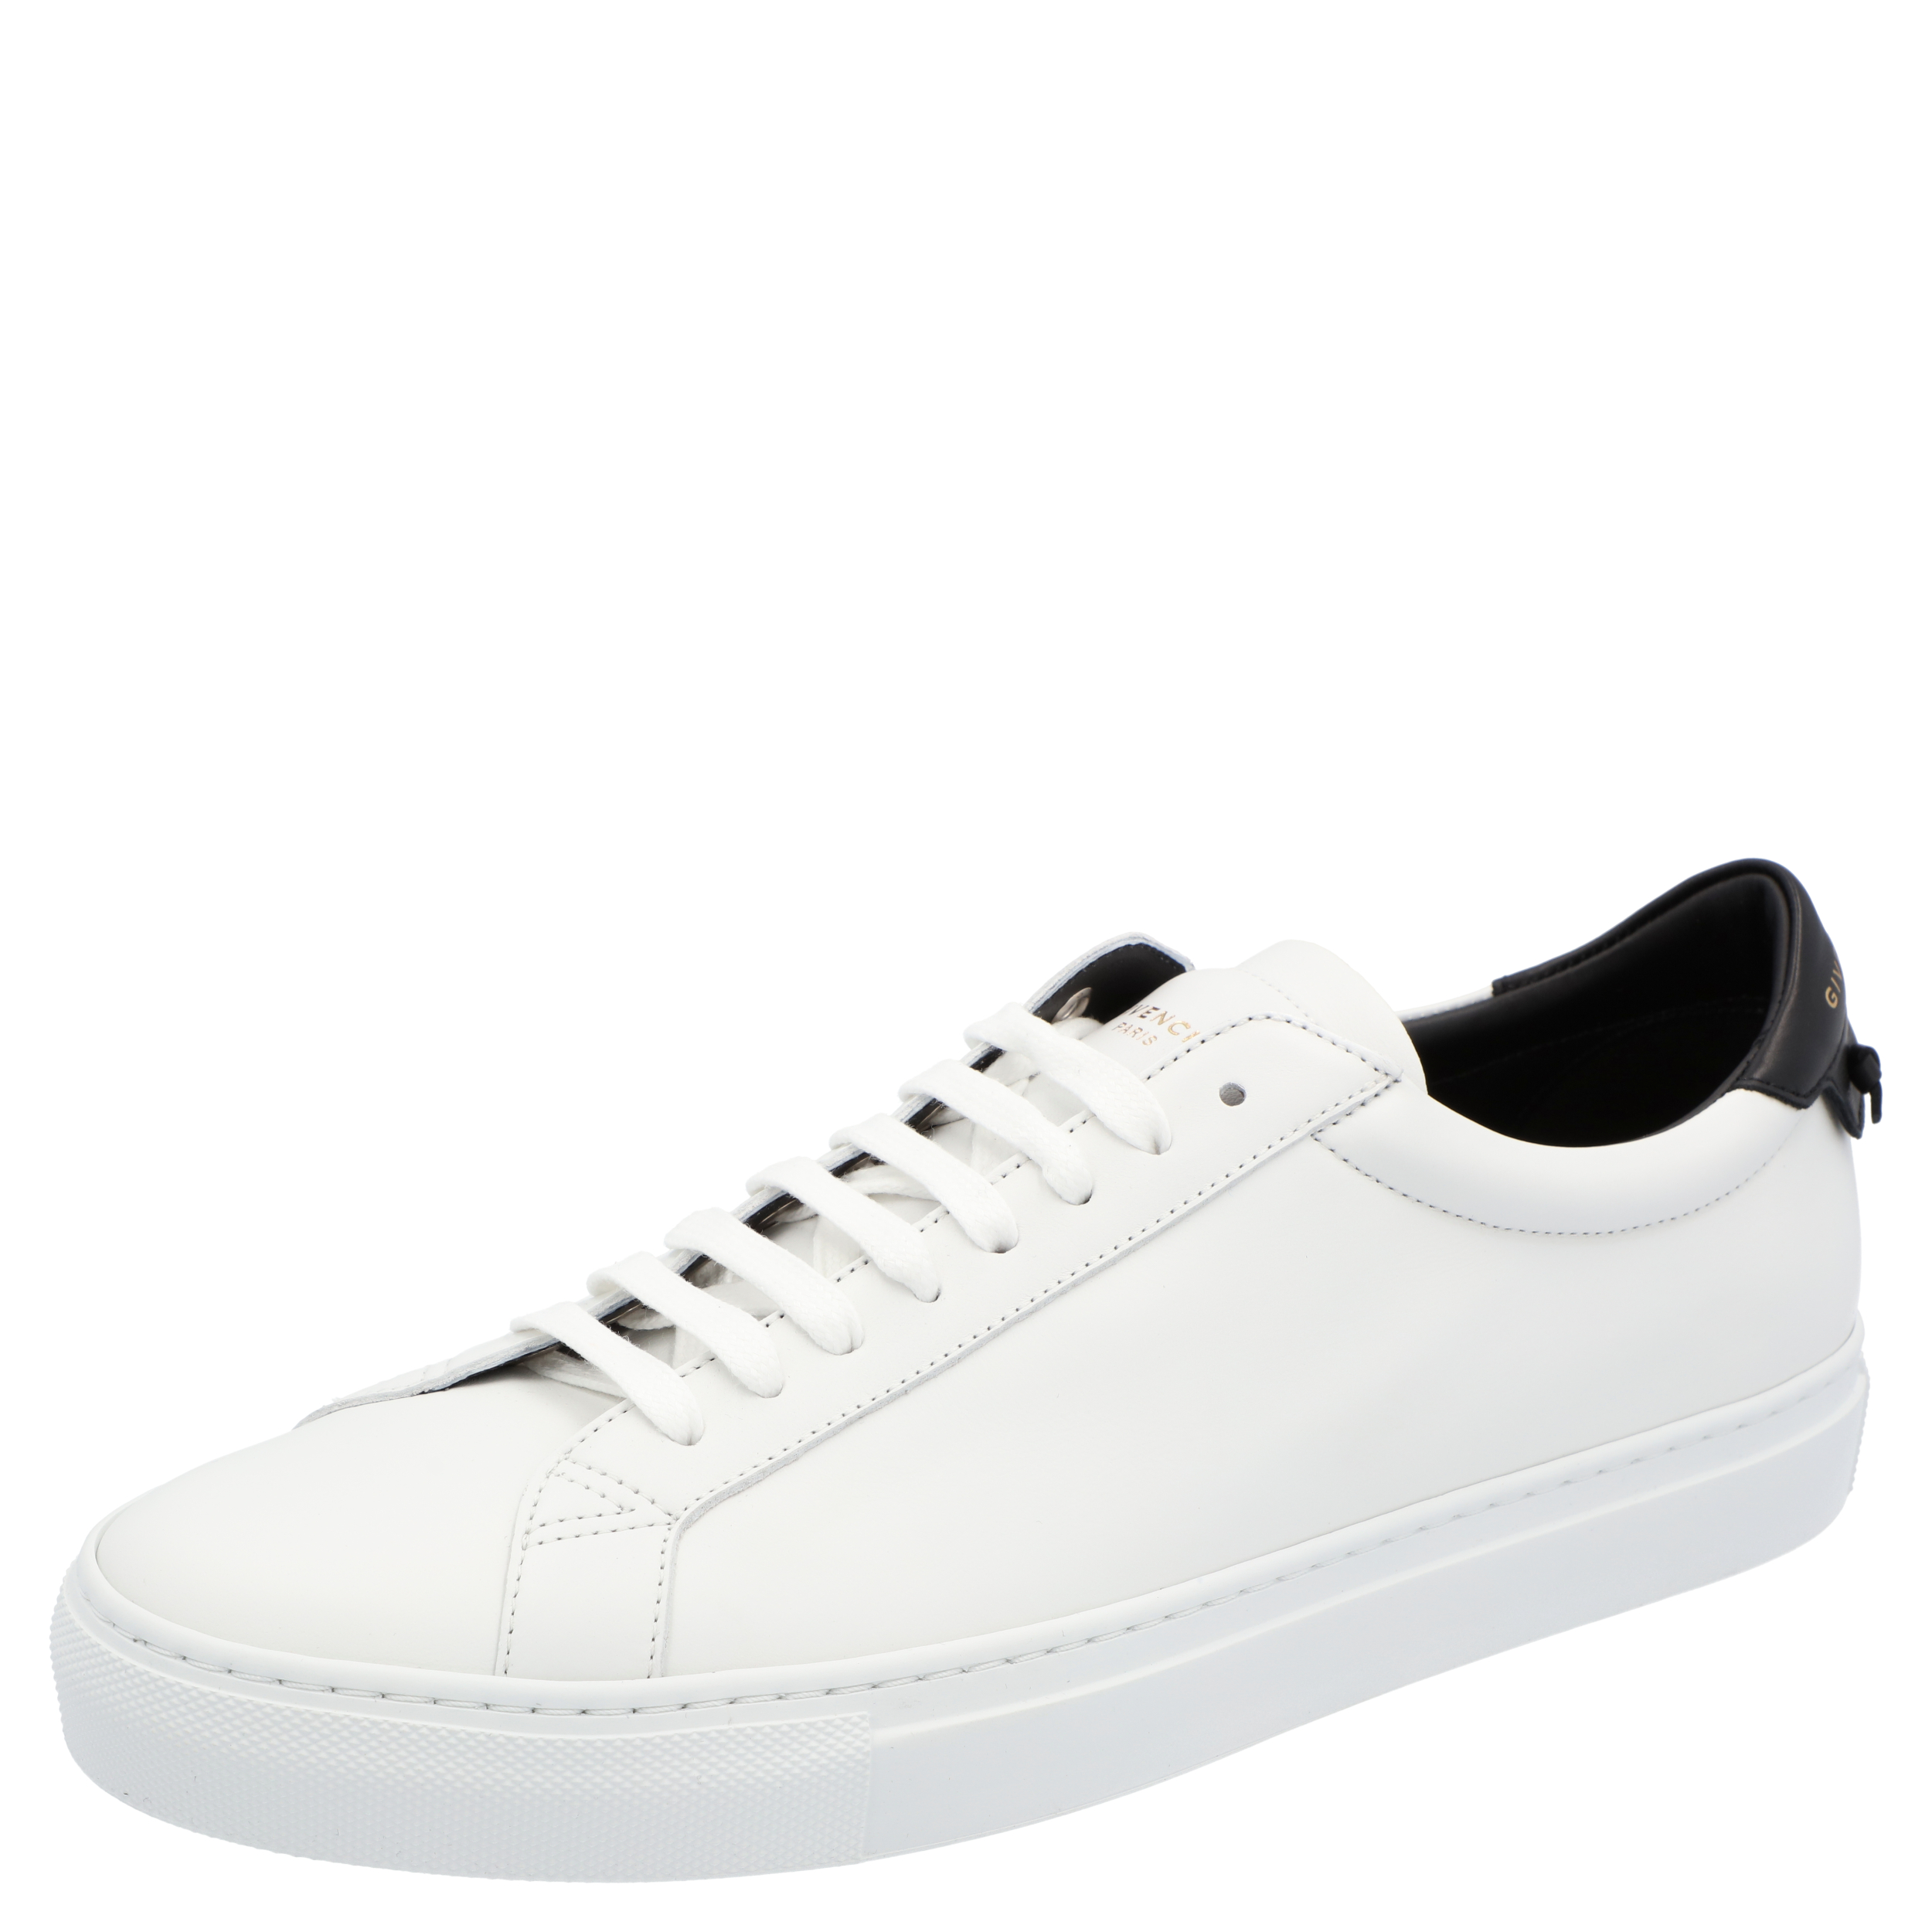 Pre-owned Givenchy White Urban Street Sneakers Size Eu 40